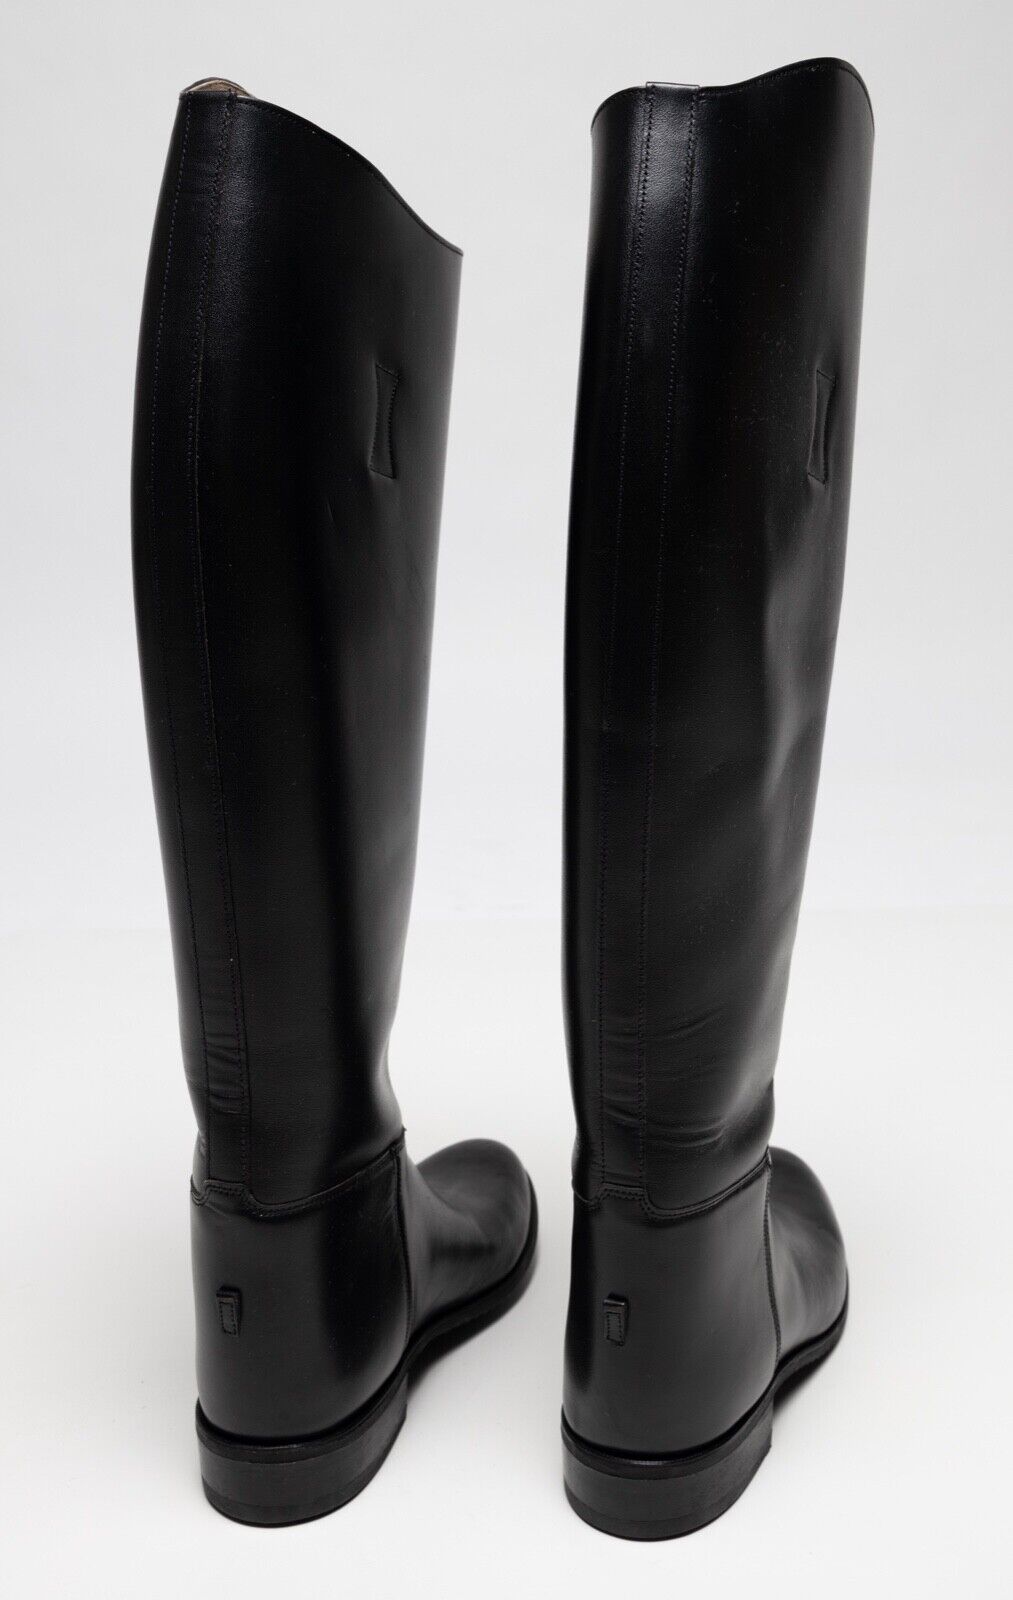 NEW International Boot Co Made in USA Officer Riding Boots Black Leather  Size 5